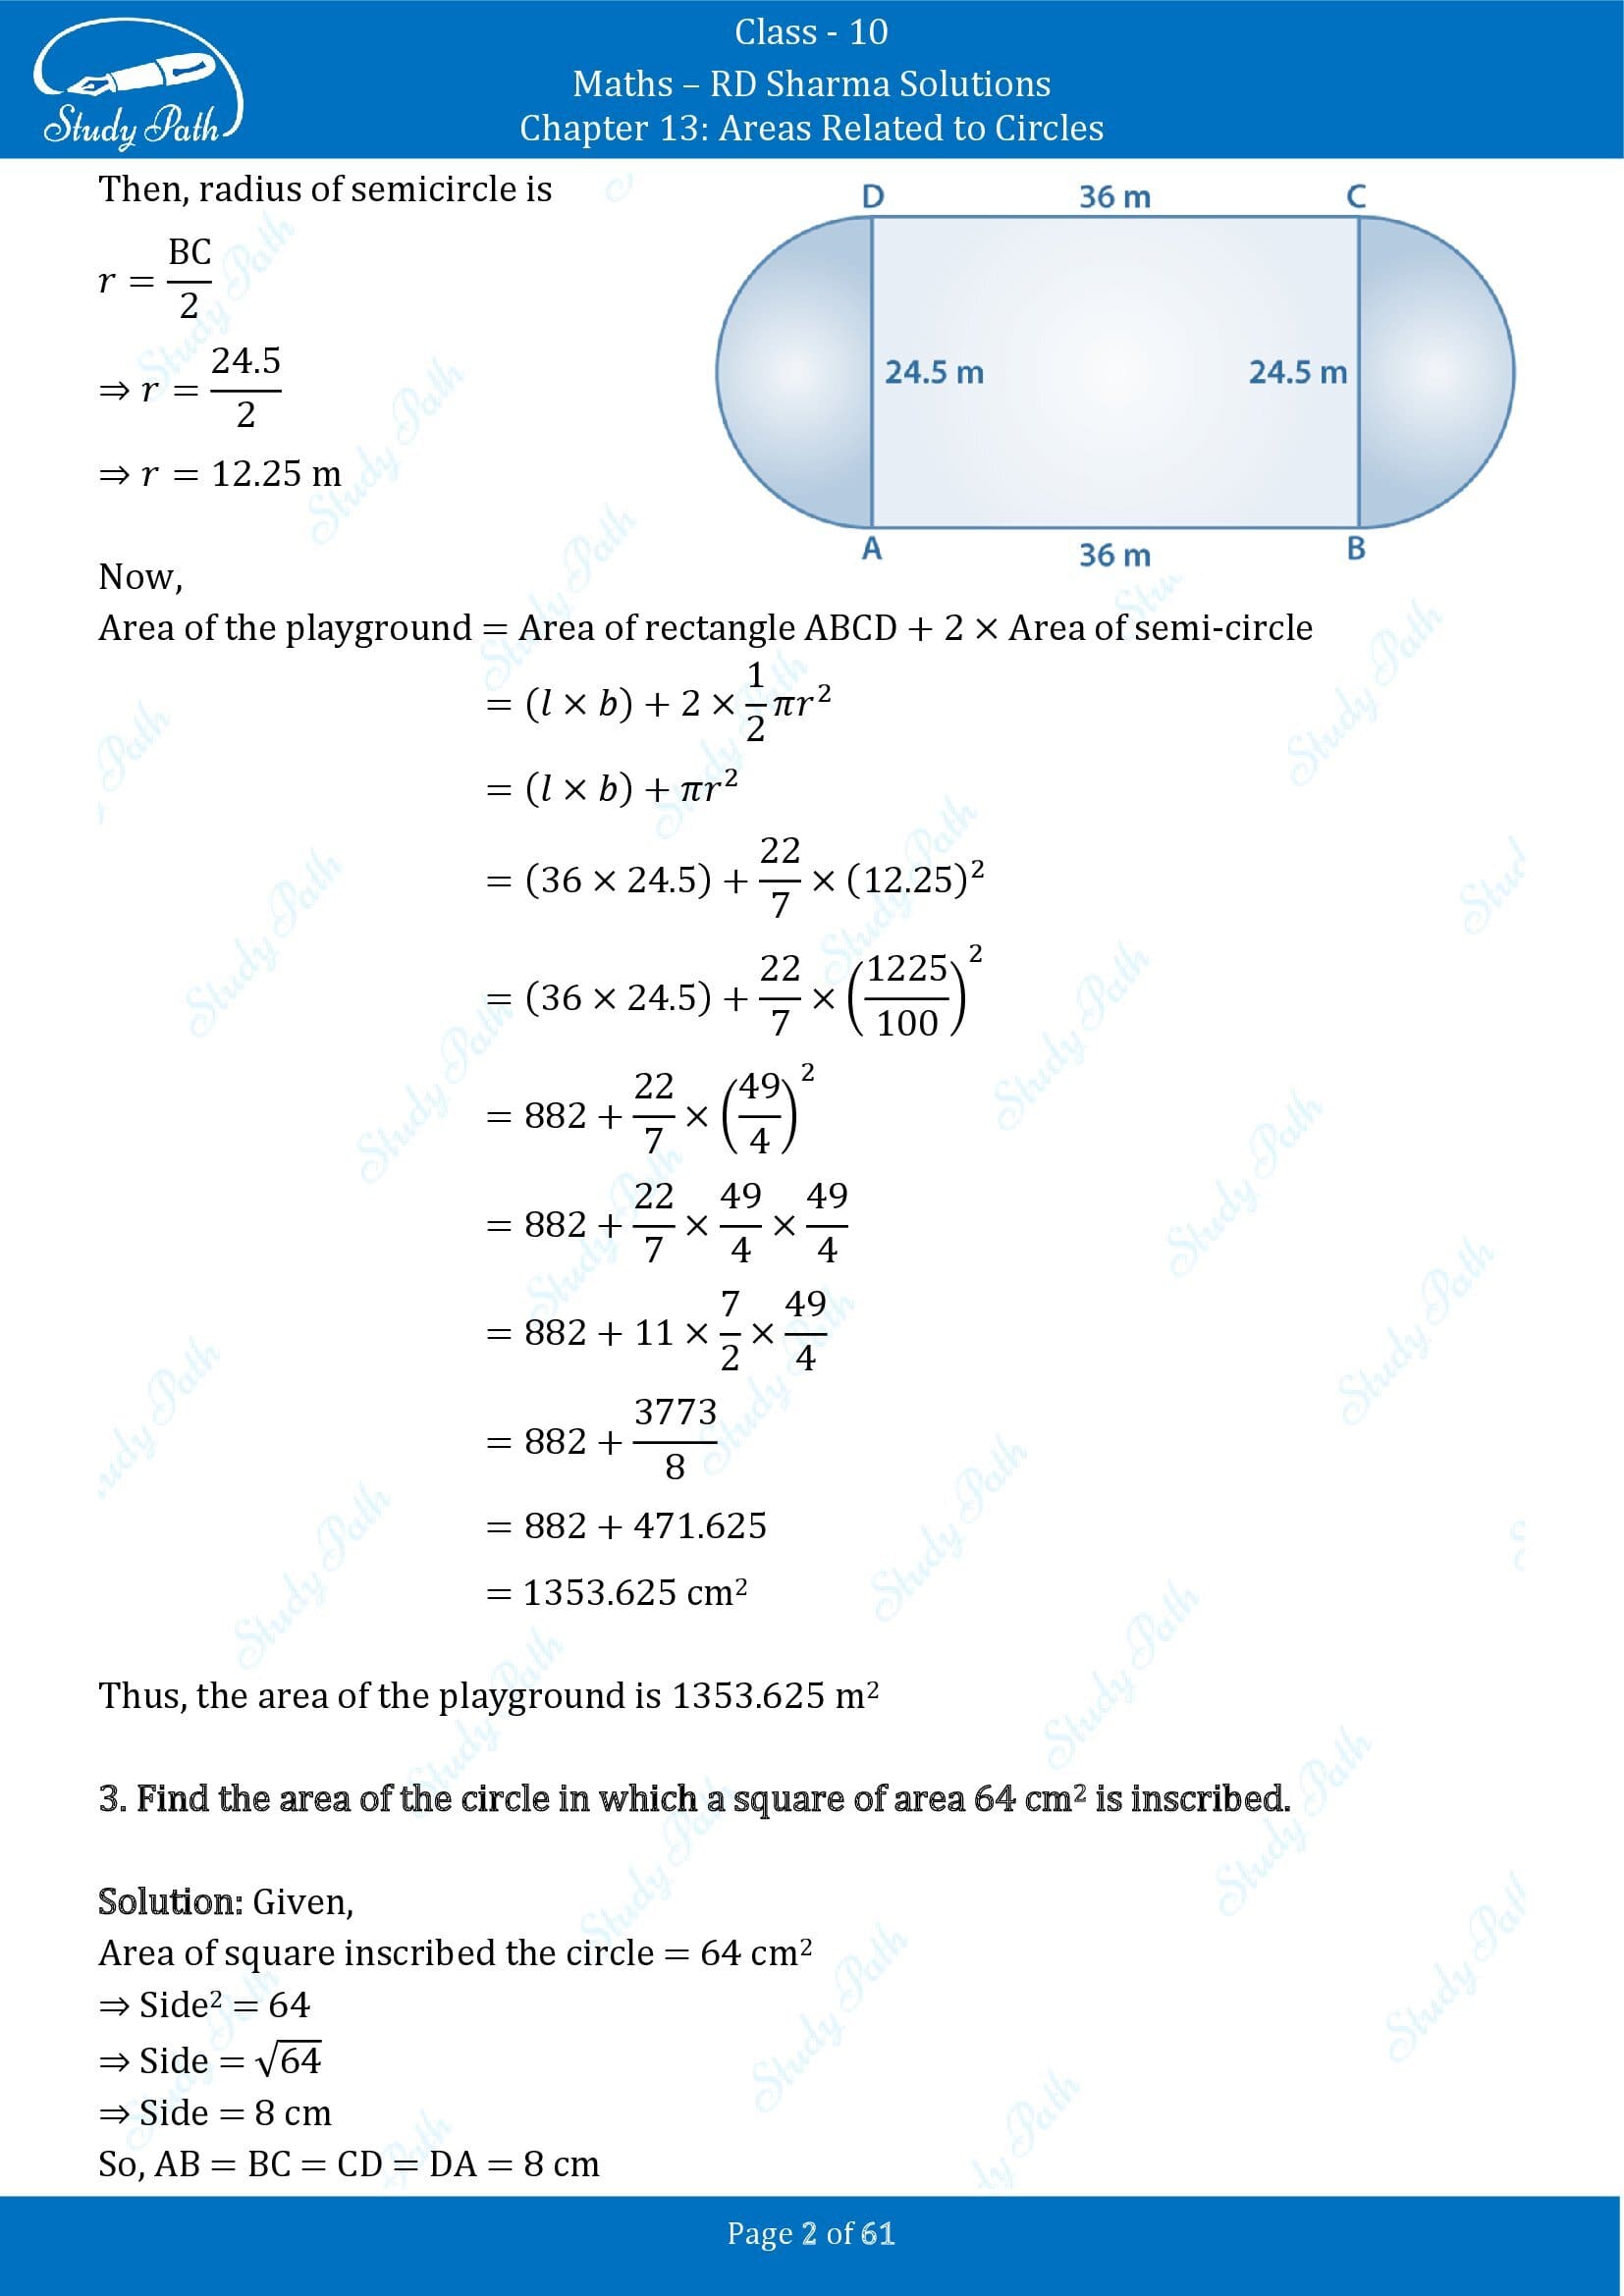 RD Sharma Solutions Class 10 Chapter 13 Areas Related to Circles Exercise 13.4 00002